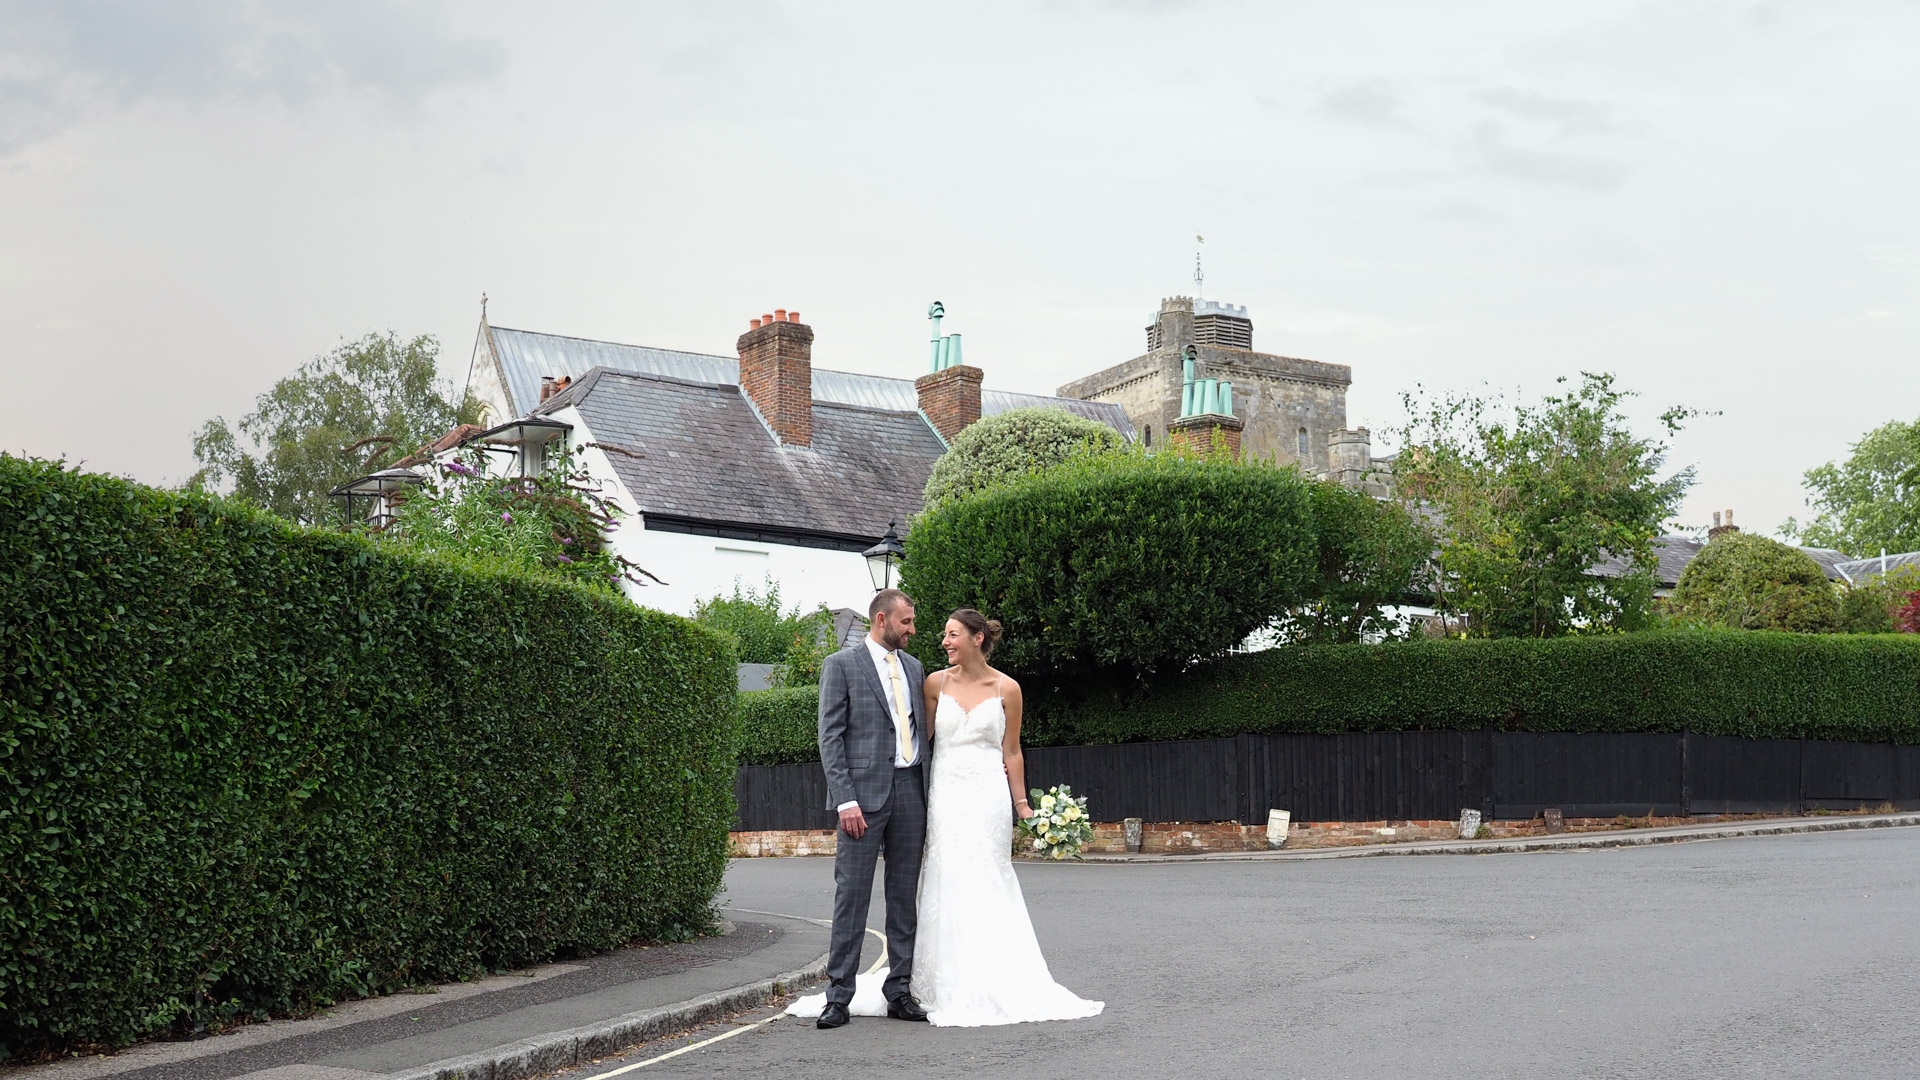 'Newlywed' couple in Romsey – Dom Brenton Photography